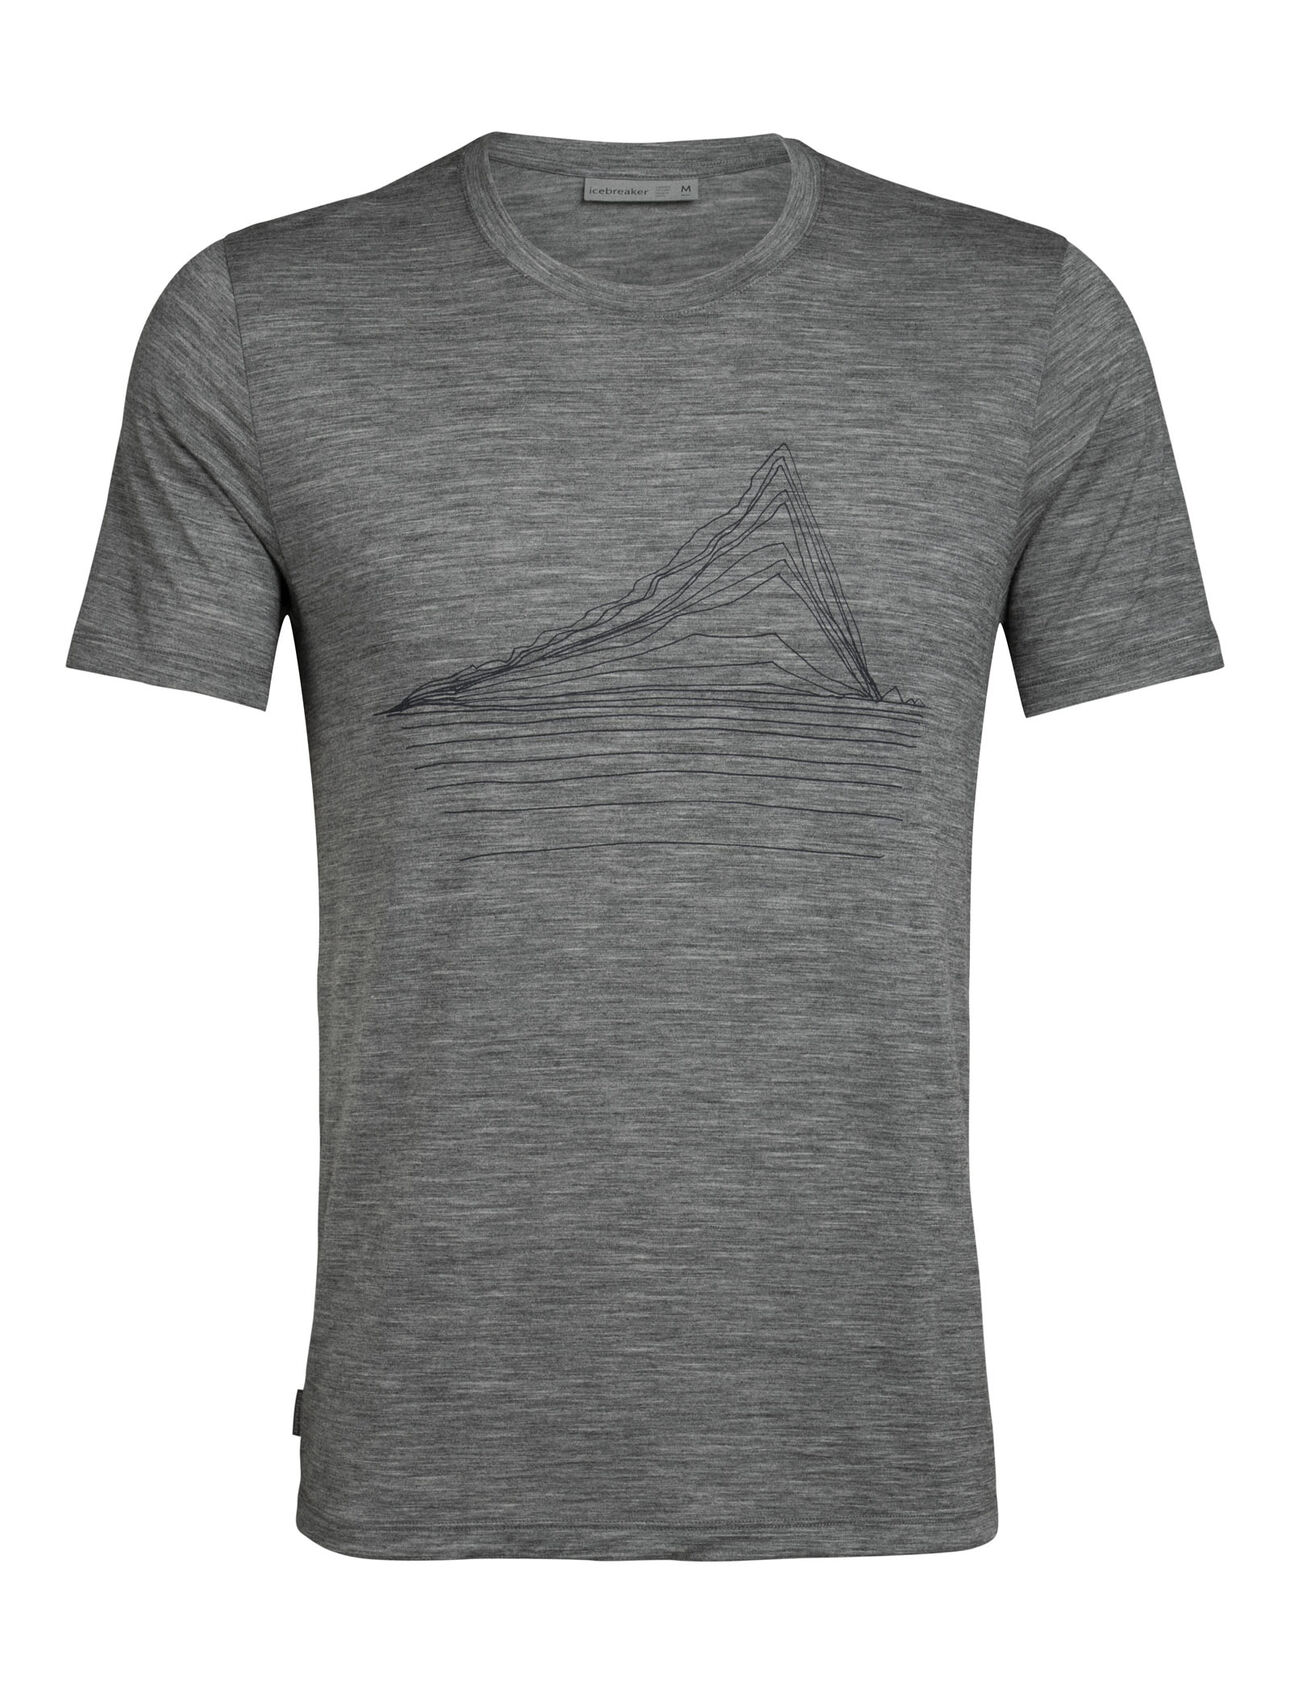 Mens Merino Tech Lite Short Sleeve Crewe T-Shirt Heating Up Our most versatile tech tee, in breathable, odor-resistant merino wool with a slight stretch. Artist William Carden-Horton creates a striking image of glacial sea ice in his iconic line-drawing style.